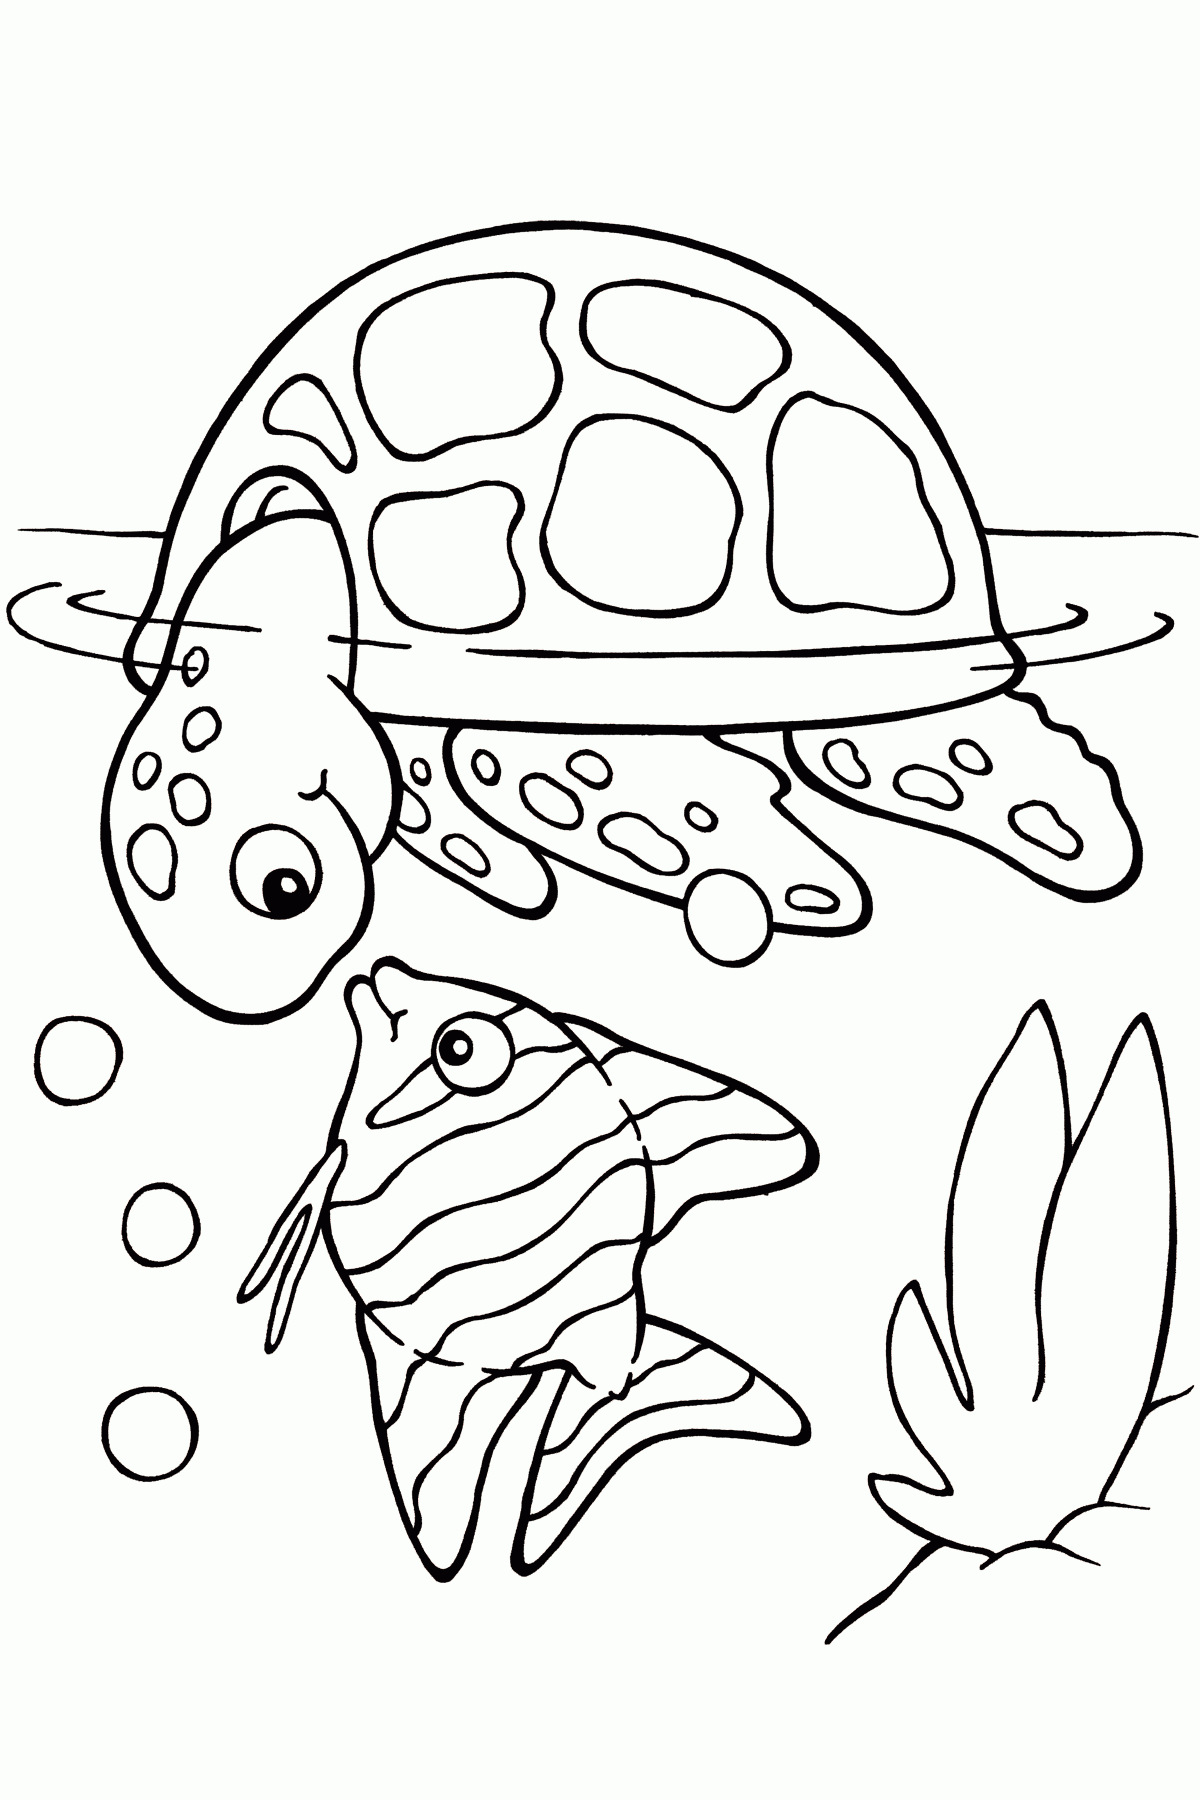 Turtles - Coloring Pages for Kids and for Adults